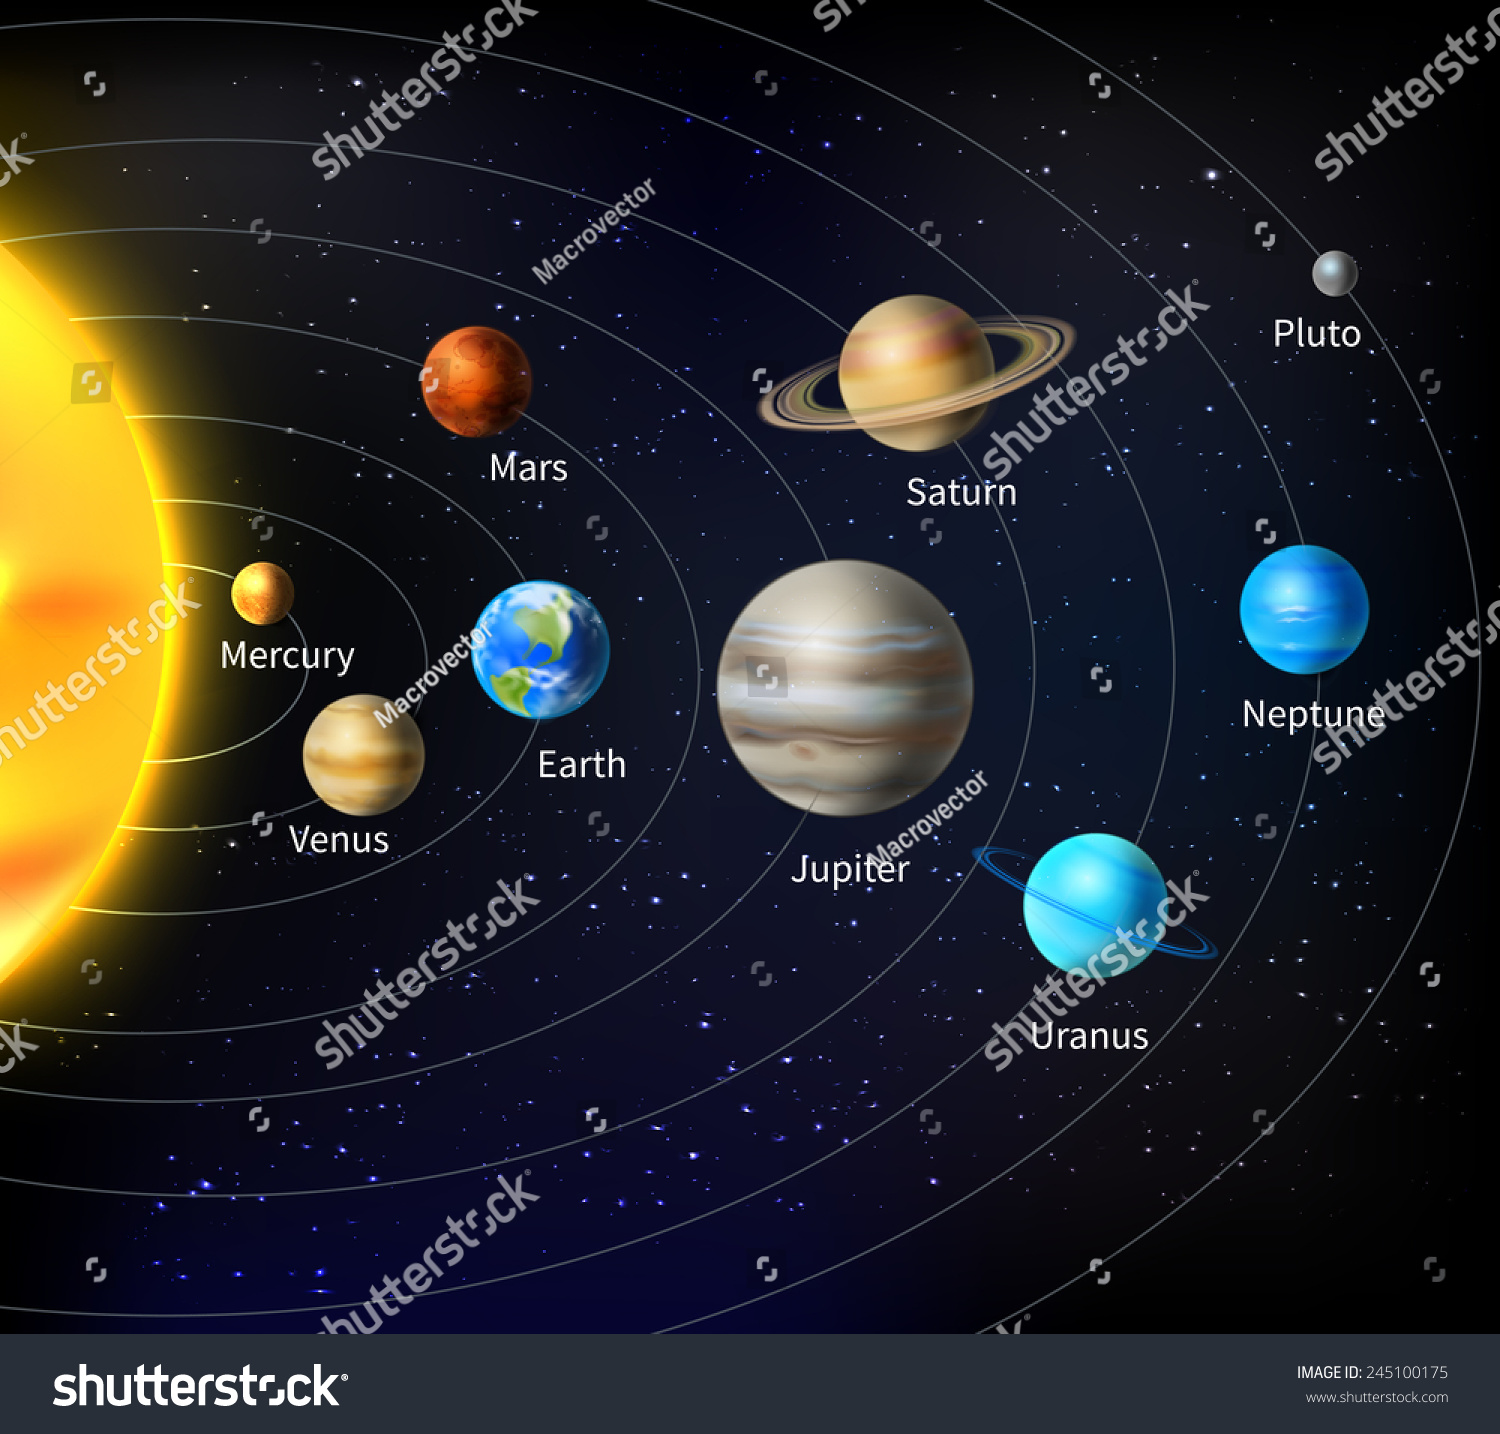 Solar System Background With Sun And Planets On Orbit Vector ...